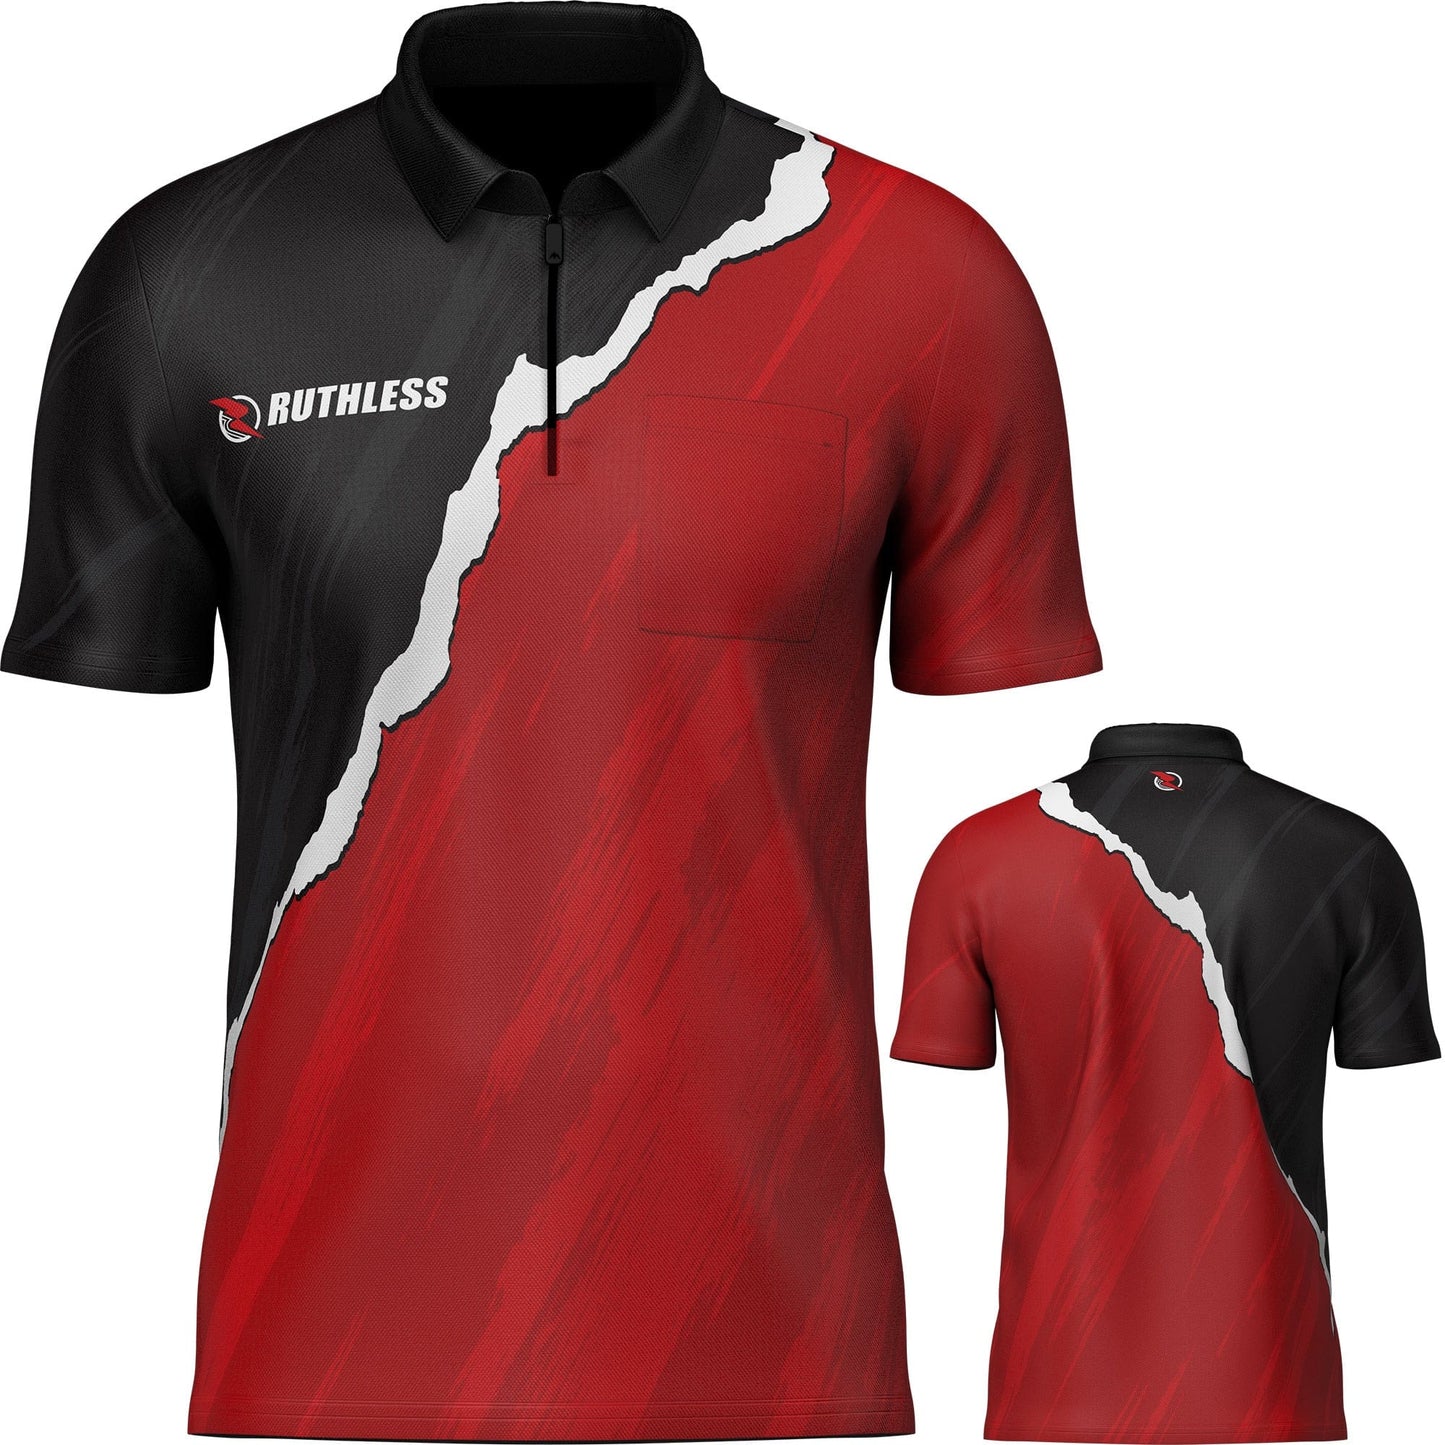 Ruthless RipTorn ECO Dart Shirt - with Pocket - Black & Red Small